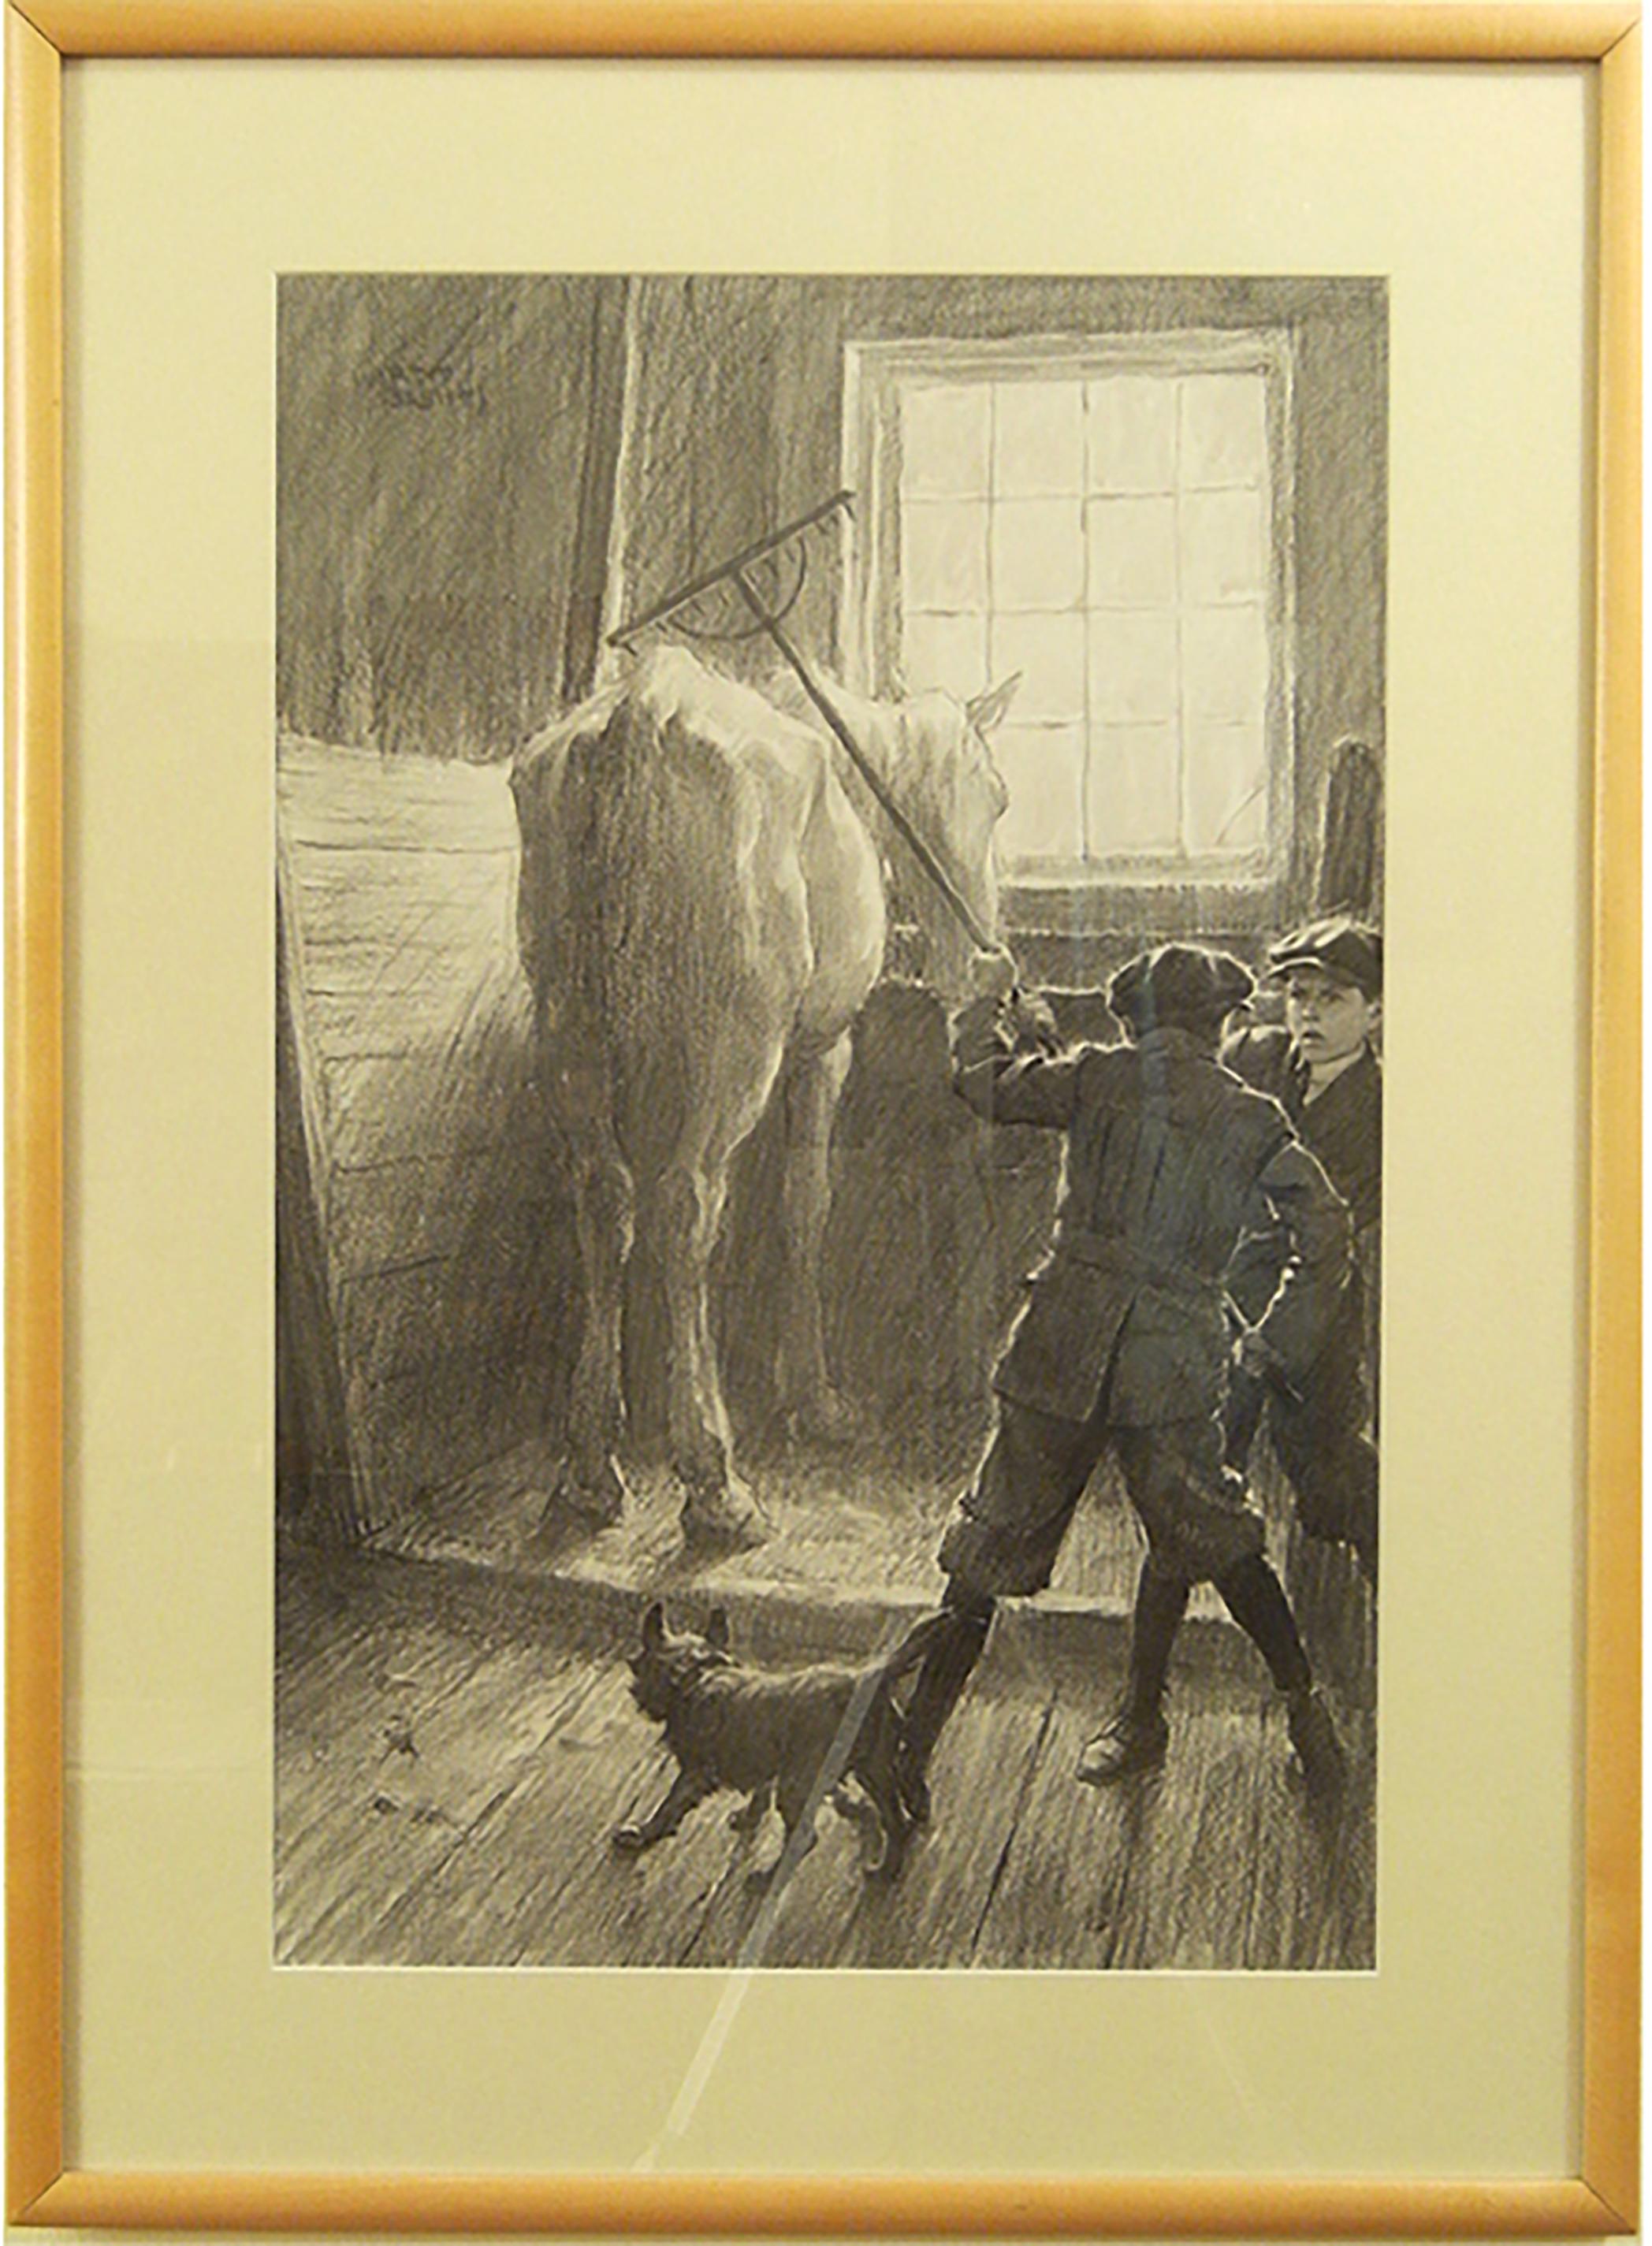 Penrod and Sam with Rake and Horse in the Barn - Art by Worth Brehm